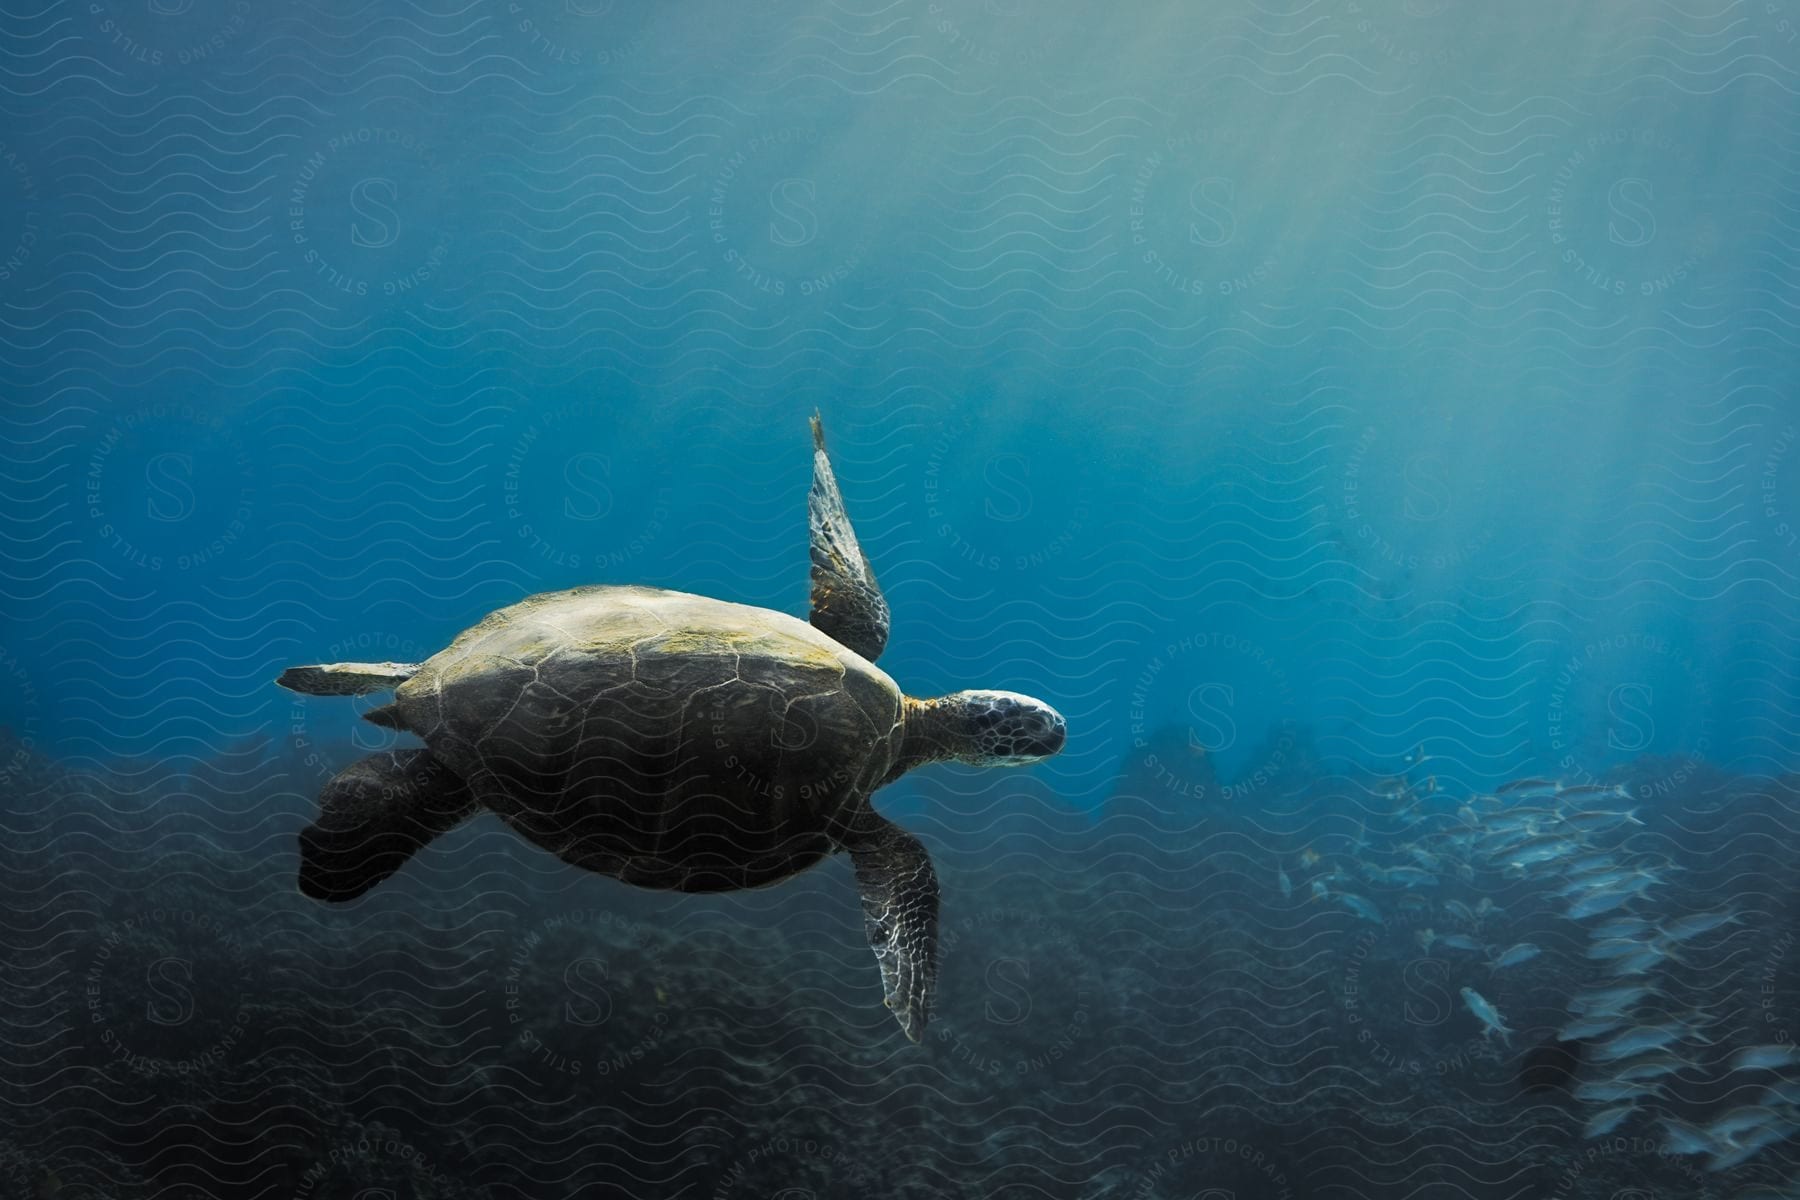 A sea turtle swims over the seabed with small fish nearby as rays of sunlight shine from above